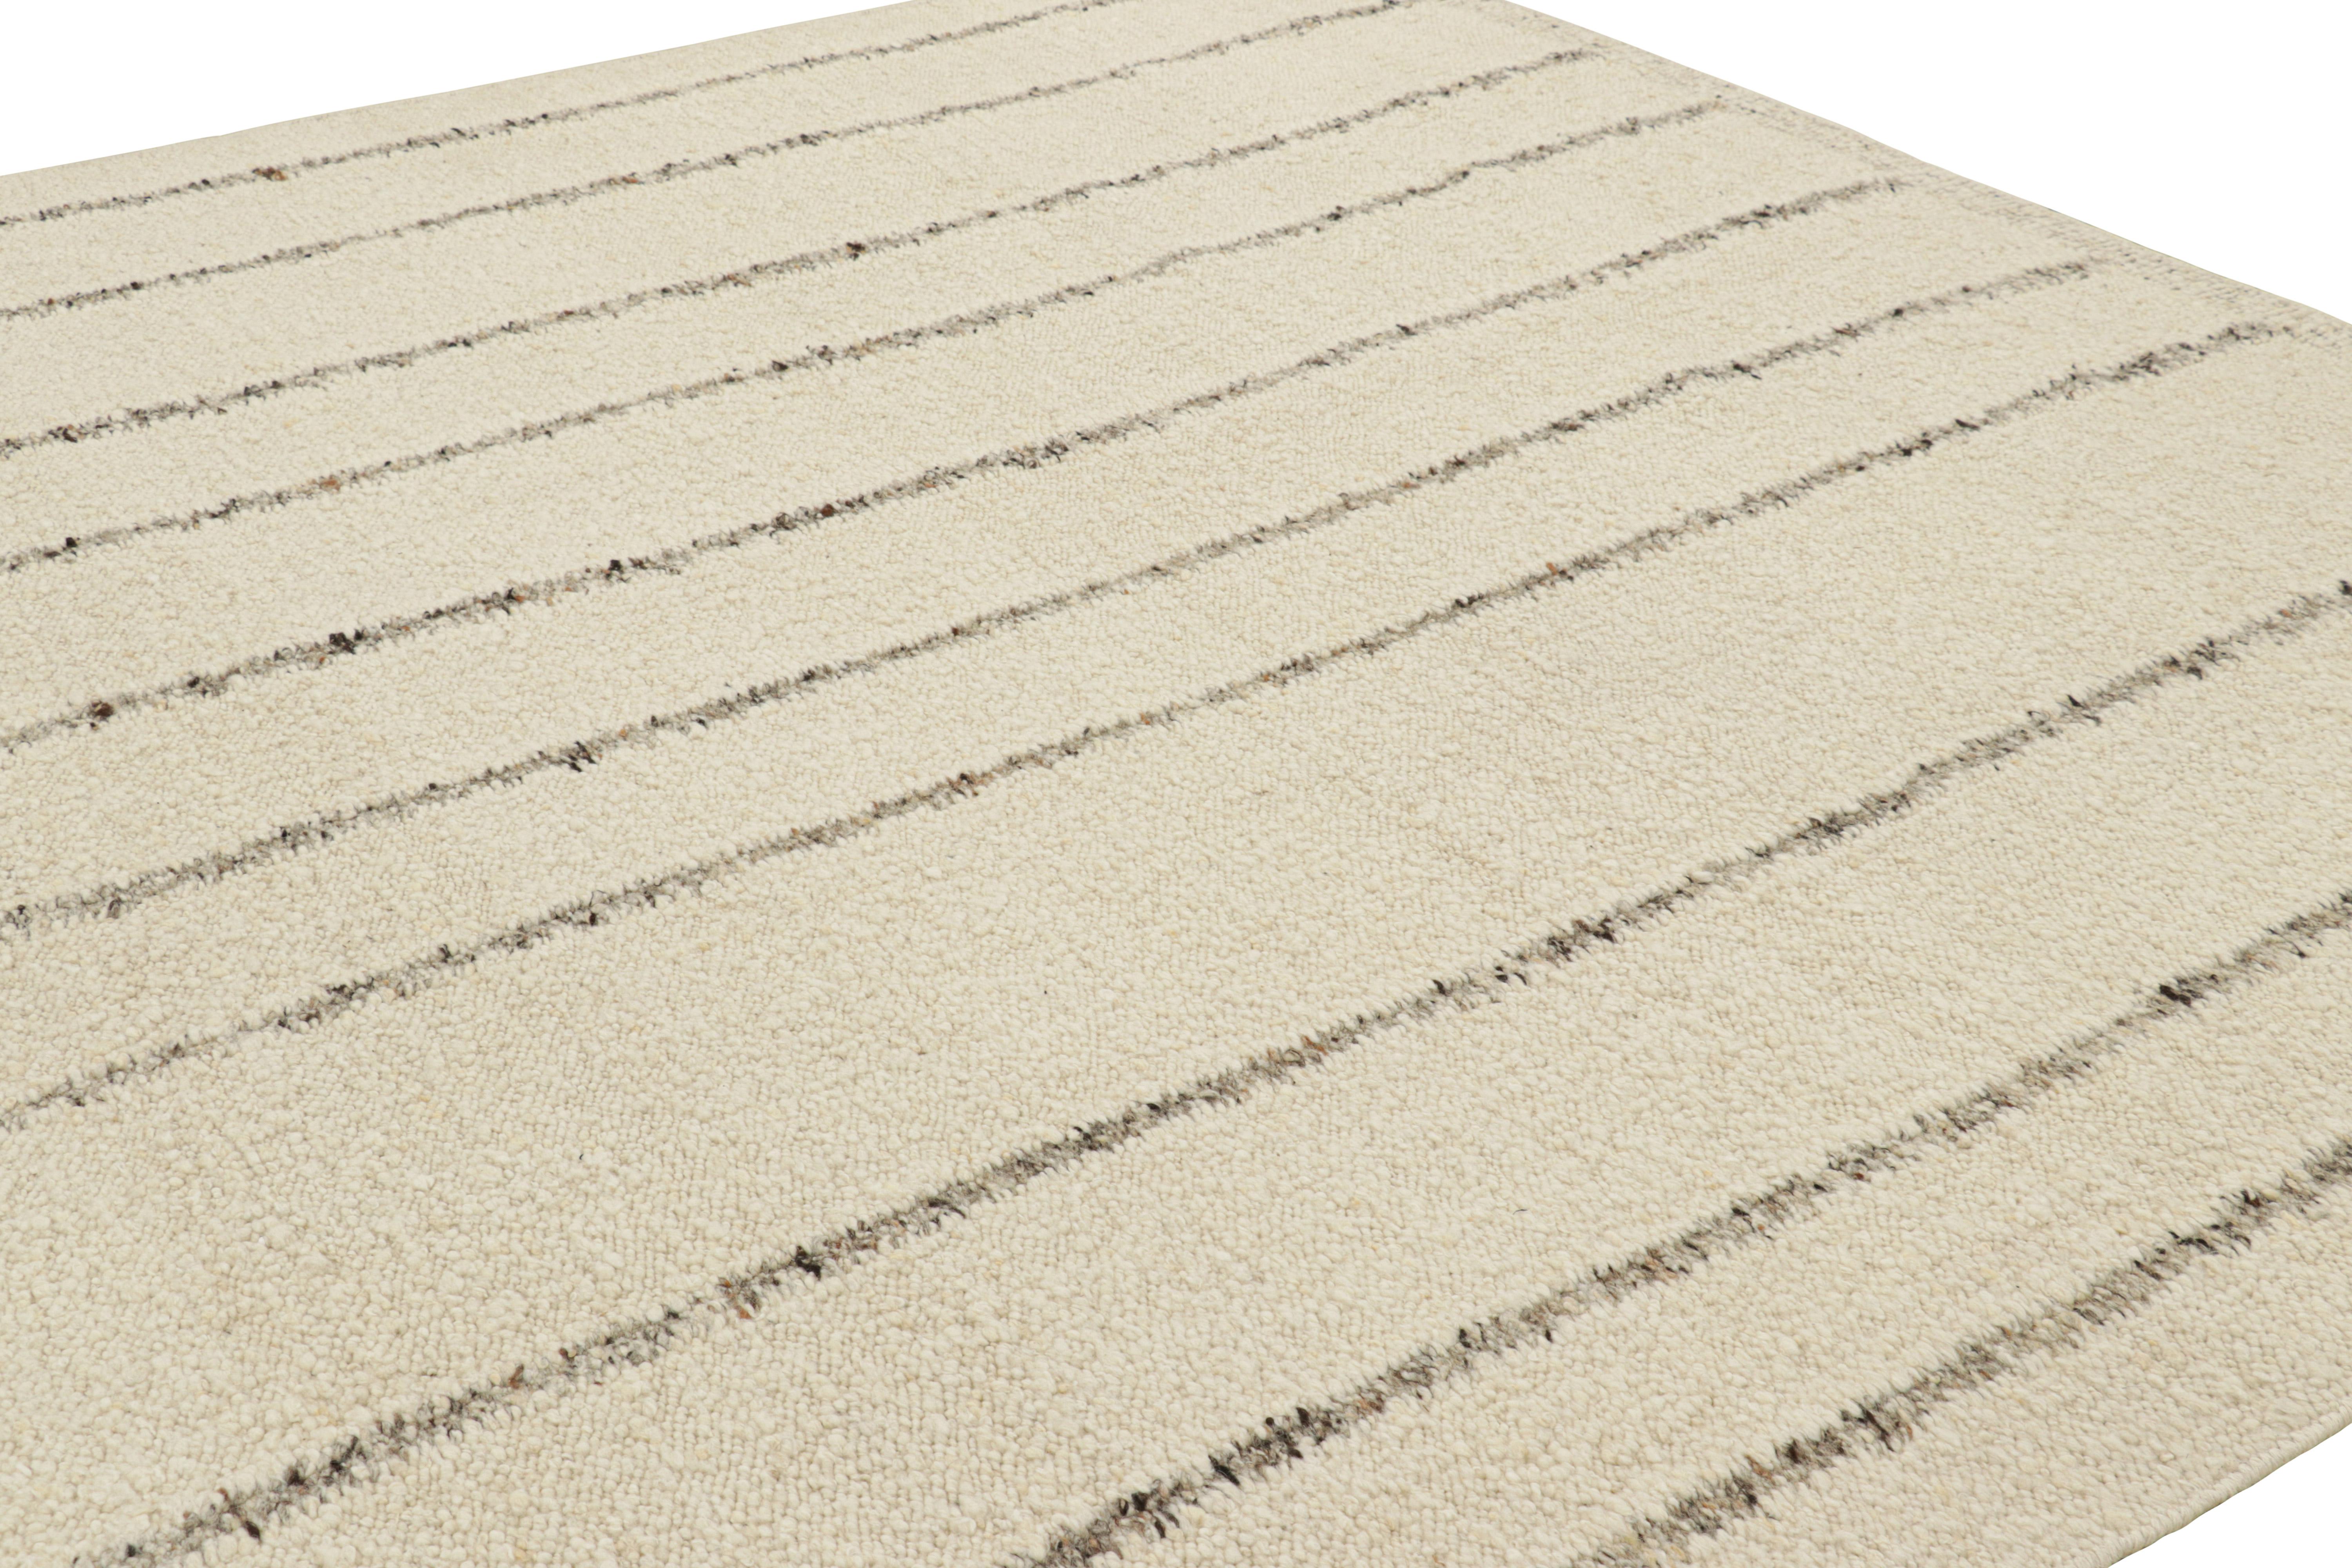 Indian Rug & Kilim’s Contemporary Kilim in Cream and White with Stripes For Sale